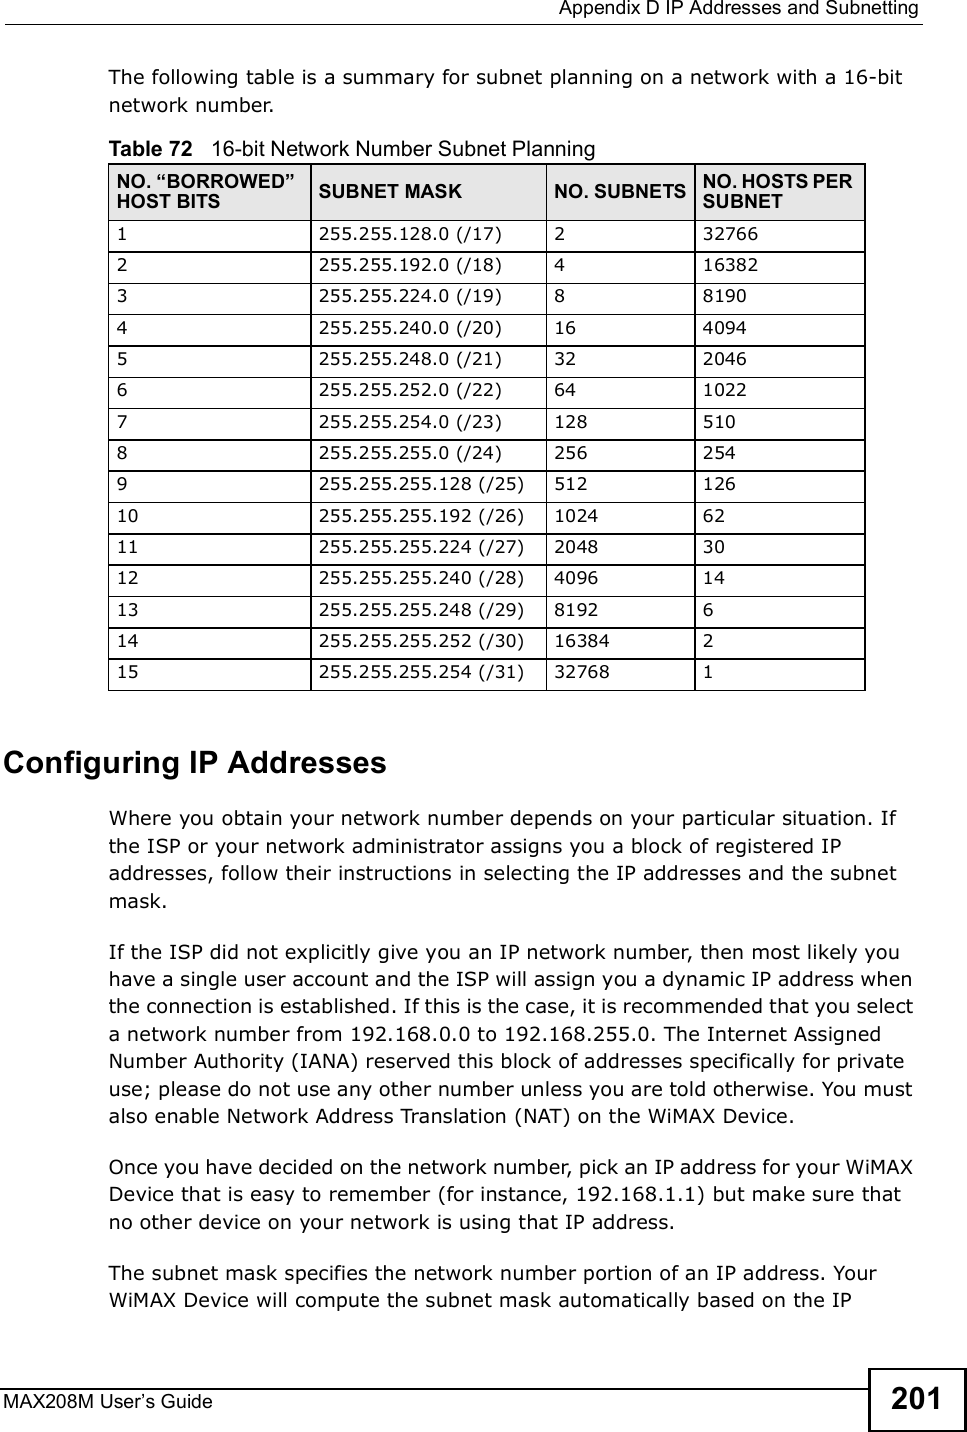  Appendix DIP Addresses and SubnettingMAX208M User s Guide 201The following table is a summary for subnet planning on a network with a 16-bit network number. Configuring IP AddressesWhere you obtain your network number depends on your particular situation. If the ISP or your network administrator assigns you a block of registered IP addresses, follow their instructions in selecting the IP addresses and the subnet mask.If the ISP did not explicitly give you an IP network number, then most likely you have a single user account and the ISP will assign you a dynamic IP address when the connection is established. If this is the case, it is recommended that you select a network number from 192.168.0.0 to 192.168.255.0. The Internet Assigned Number Authority (IANA) reserved this block of addresses specifically for private use; please do not use any other number unless you are told otherwise. You must also enable Network Address Translation (NAT) on the WiMAX Device. Once you have decided on the network number, pick an IP address for your WiMAX Device that is easy to remember (for instance, 192.168.1.1) but make sure that no other device on your network is using that IP address.The subnet mask specifies the network number portion of an IP address. Your WiMAX Device will compute the subnet mask automatically based on the IP Table 72   16-bit Network Number Subnet PlanningNO. #BORROWED$ HOST BITS SUBNET MASK NO. SUBNETS NO. HOSTS PER SUBNET1255.255.128.0 (/17) 2 327662255.255.192.0 (/18) 4 163823255.255.224.0 (/19) 8 81904 255.255.240.0 (/20) 16 40945 255.255.248.0 (/21) 32 20466 255.255.252.0 (/22) 64 10227 255.255.254.0 (/23) 128 5108 255.255.255.0 (/24) 256 2549 255.255.255.128 (/25) 512 12610 255.255.255.192 (/26) 1024 6211 255.255.255.224 (/27) 2048 3012 255.255.255.240 (/28) 4096 1413 255.255.255.248 (/29) 8192 614 255.255.255.252 (/30) 16384 215 255.255.255.254 (/31) 32768 1